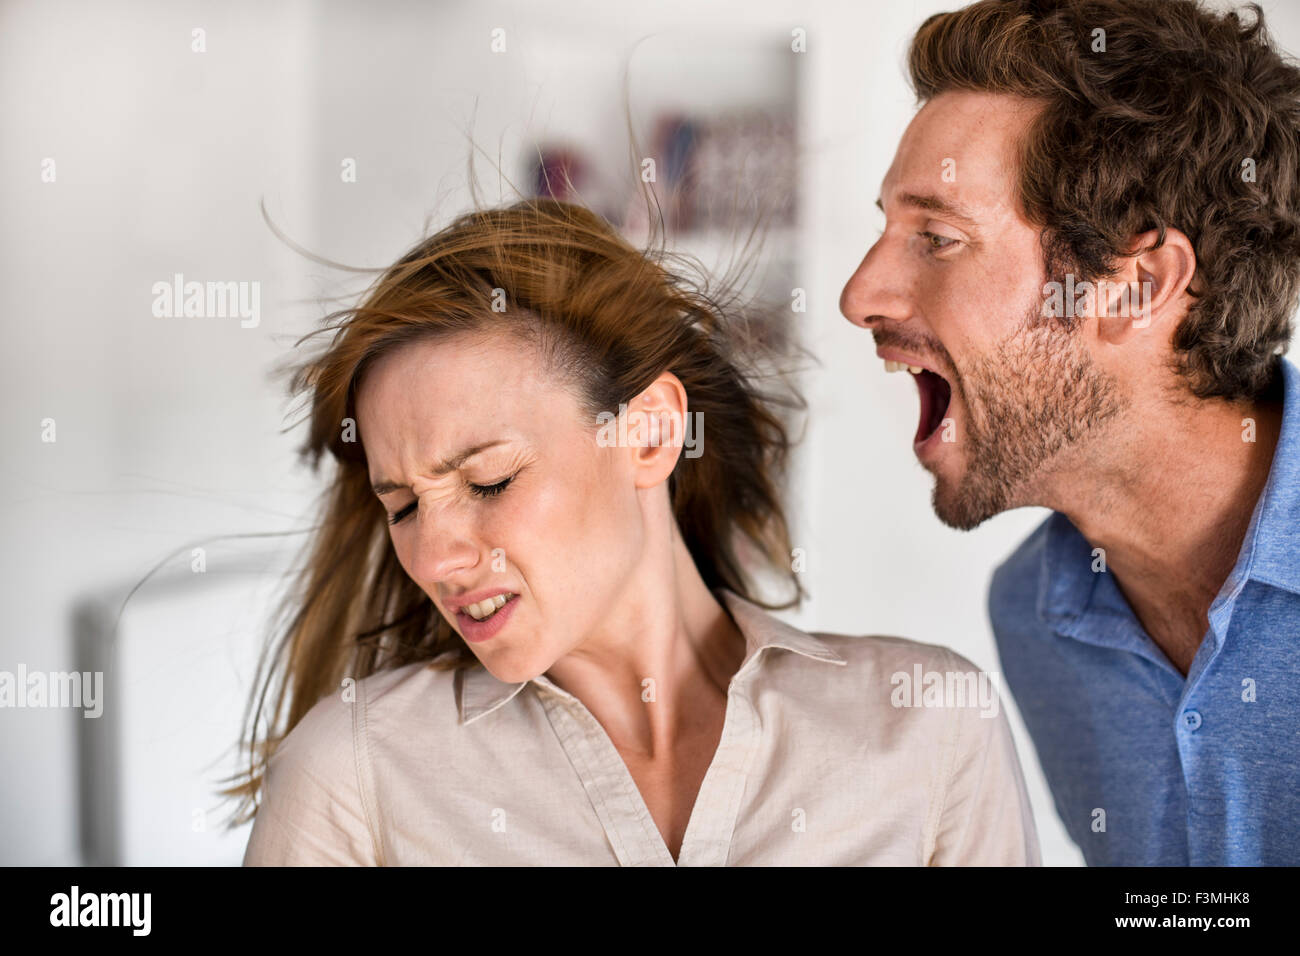 Angry man. He yells at his wife Stock Photo